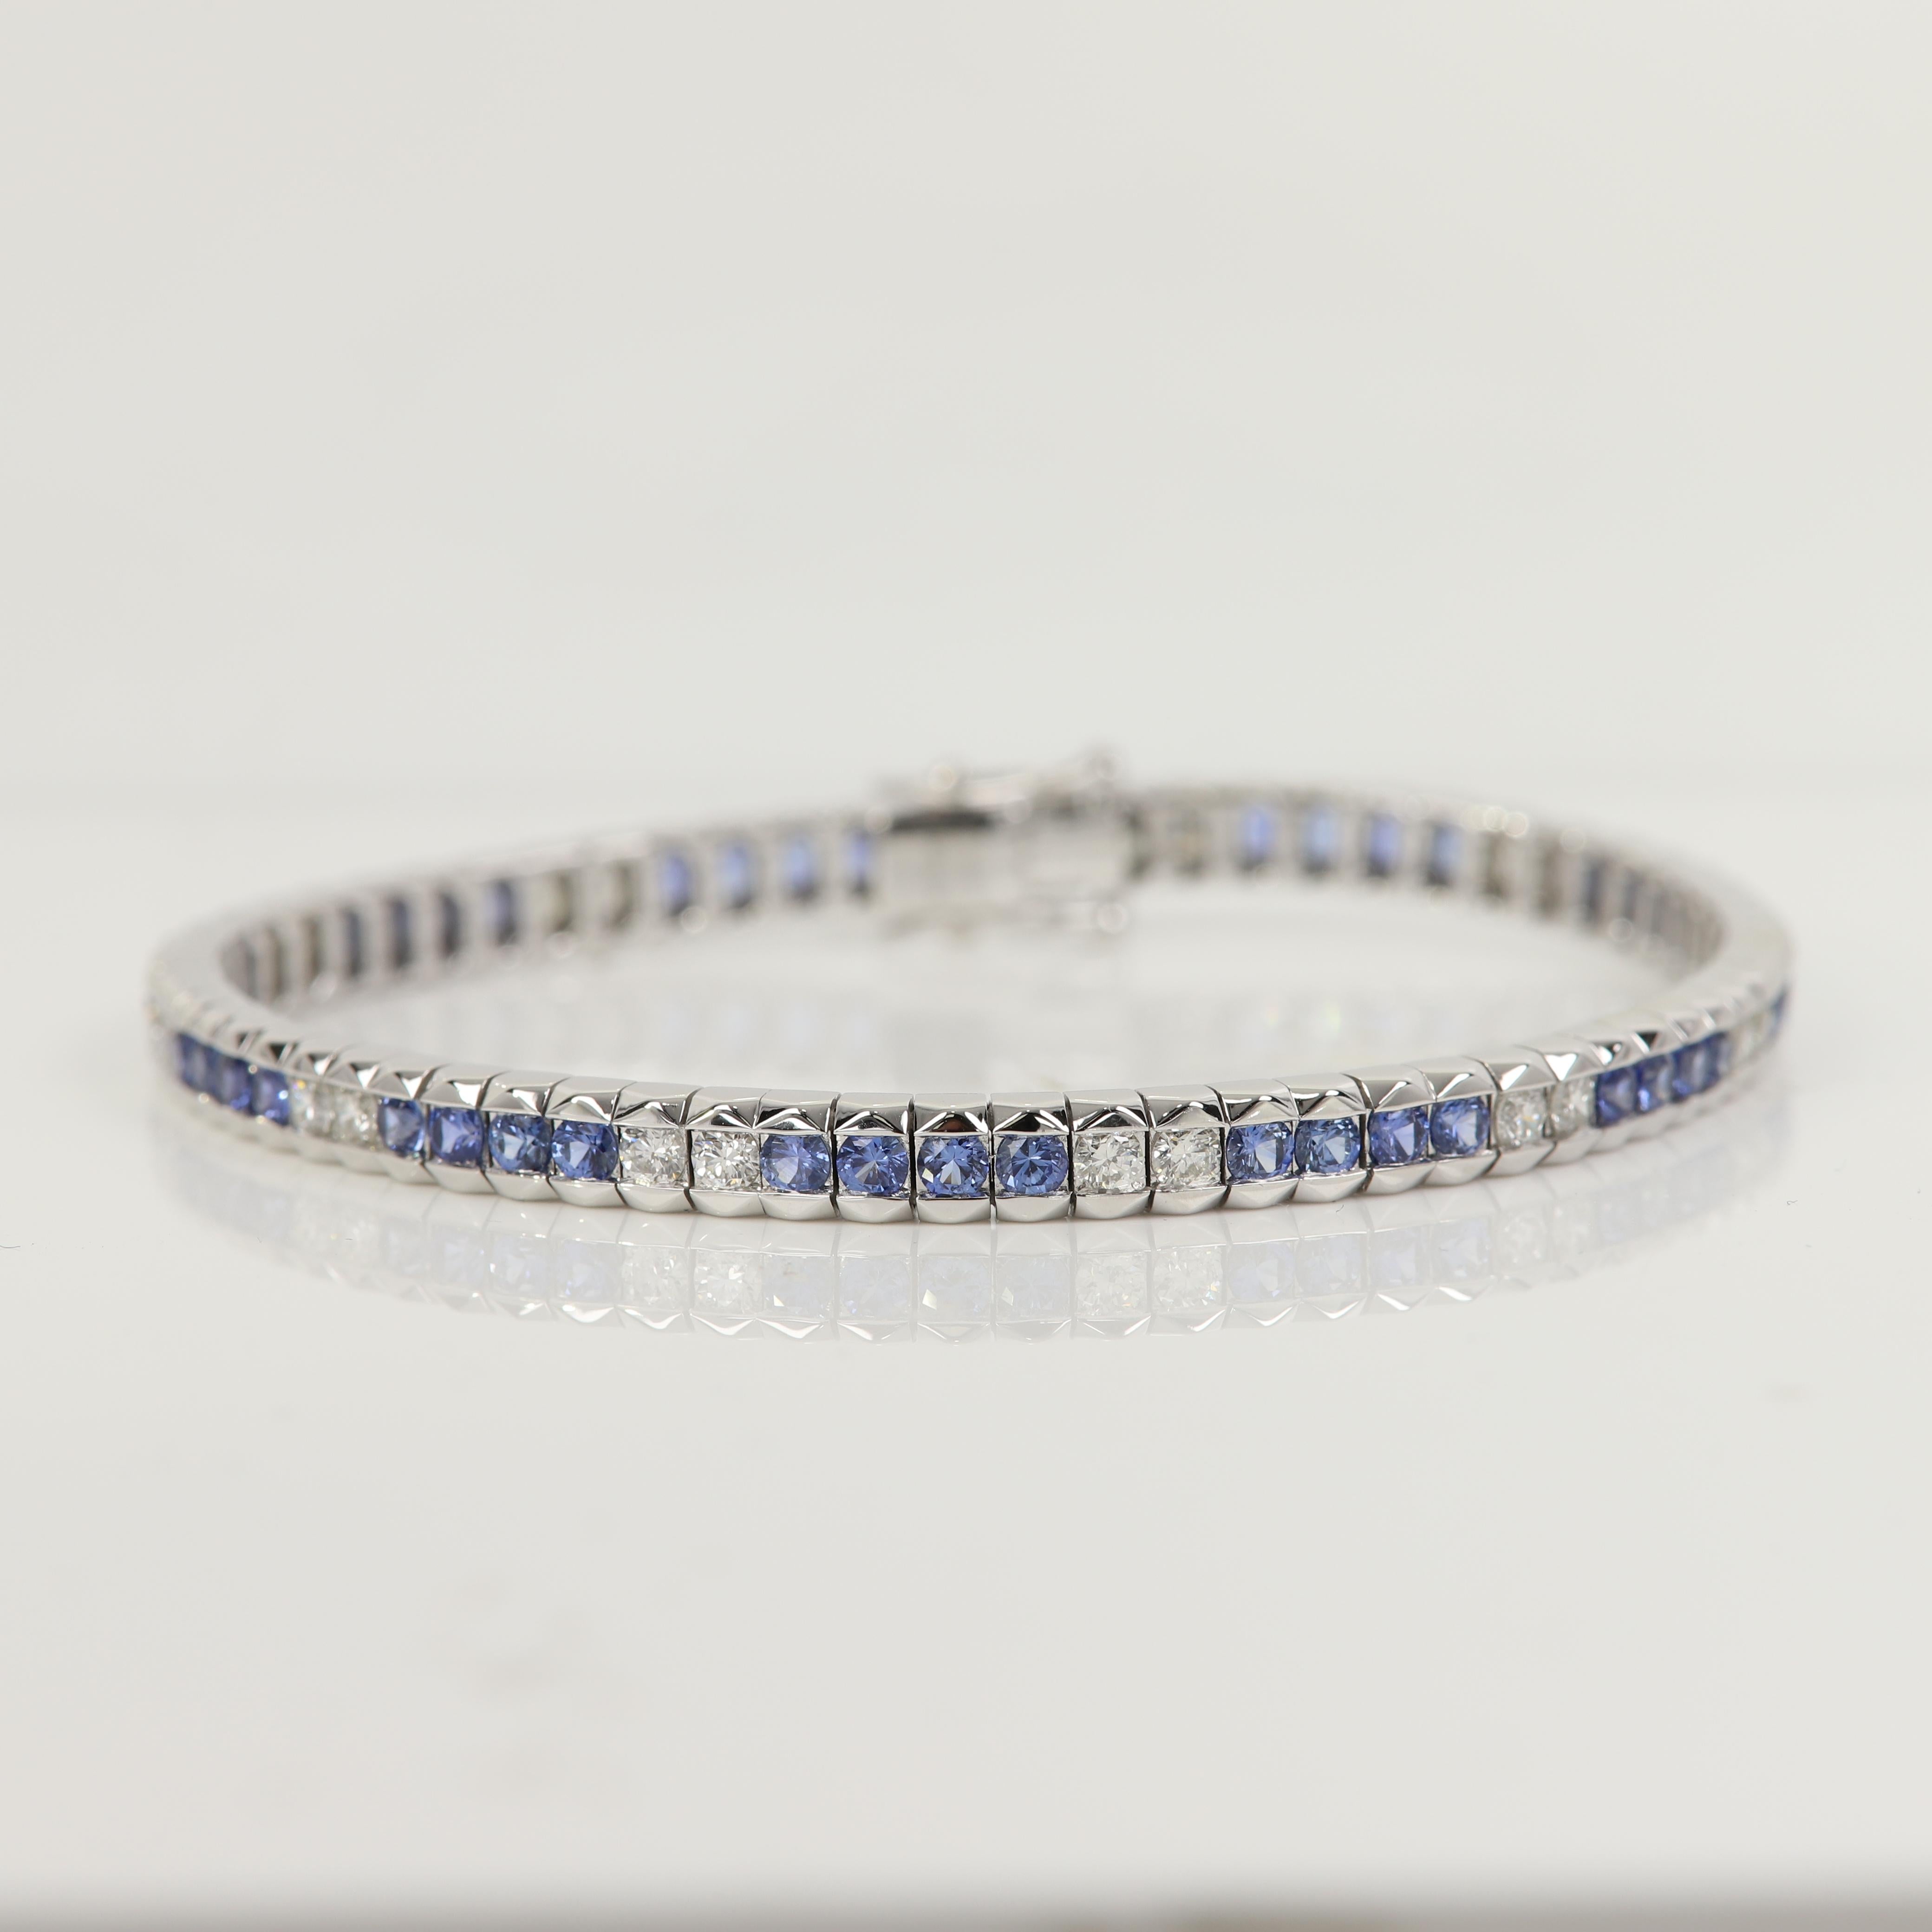 Blue Sapphire and Diamonds
all stones are natural
all stones are round shape

This Tennis Bracelet is unique in that it is a bit stiff and gives the felling of a semi bangle, when on the hand it is a nice round look and stays in its shape.
made of